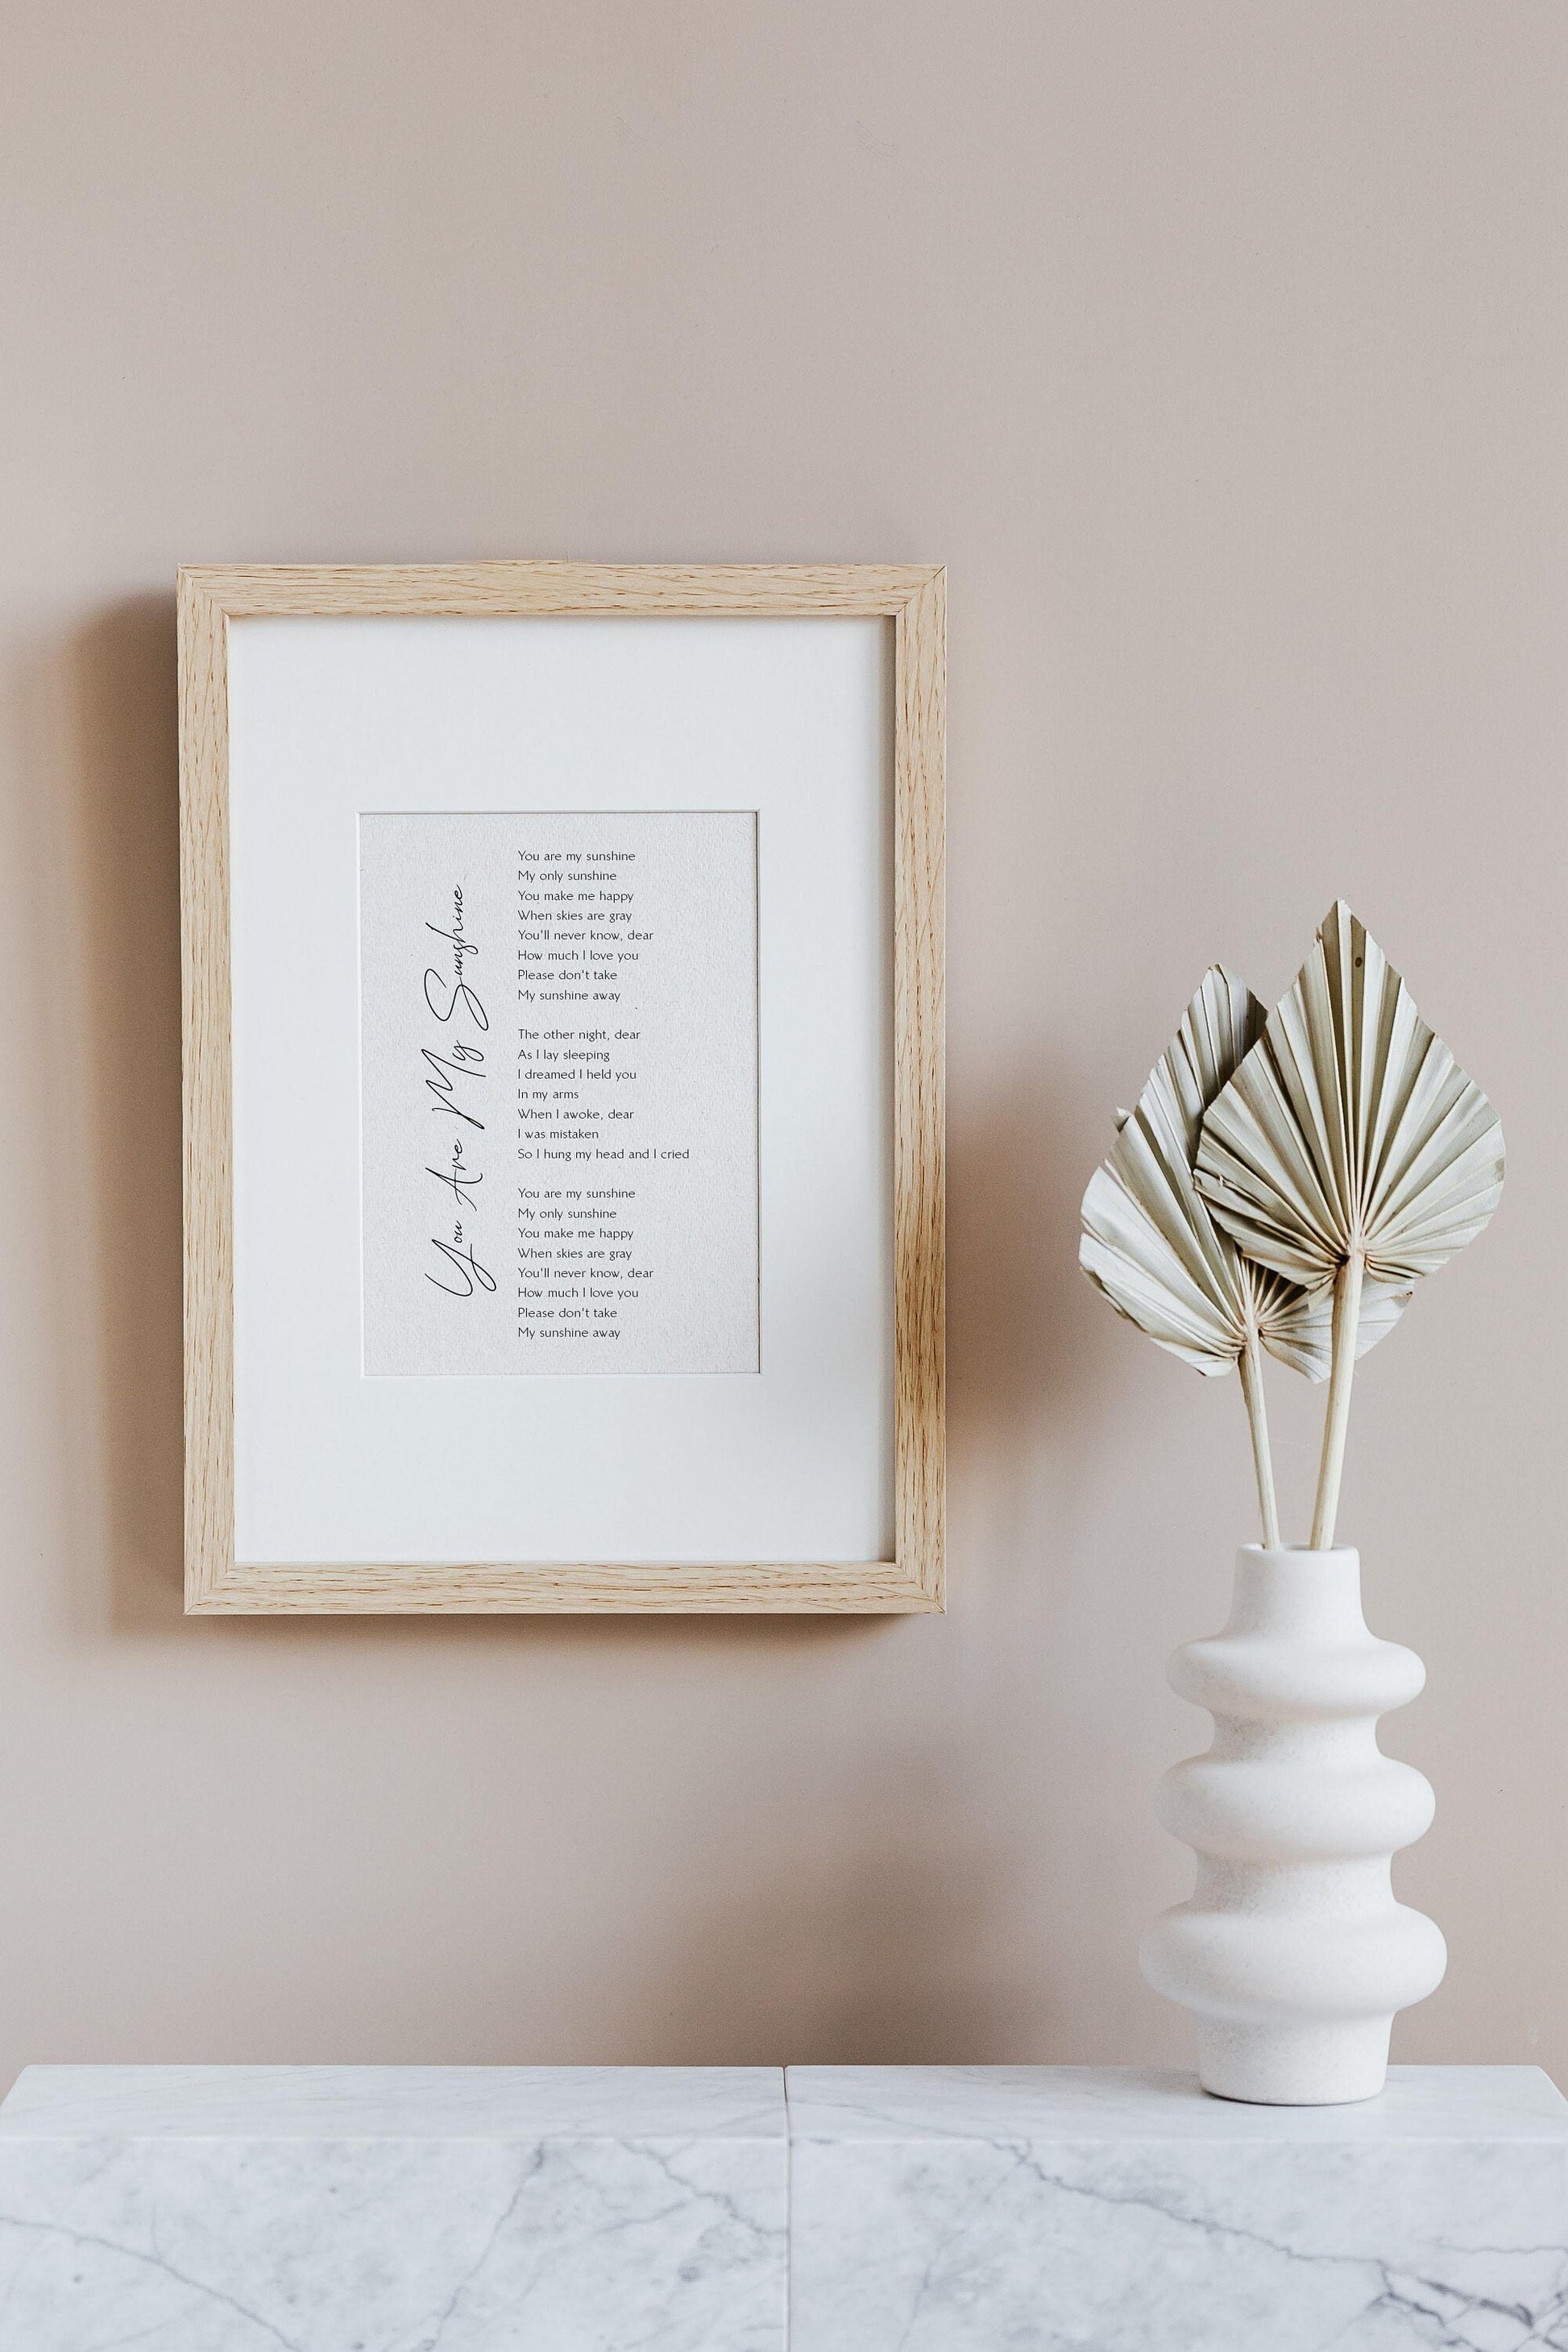 You Are My Sunshine, My Only Sunshine Poster - Song Lyrics - You are my sunshine print Framed